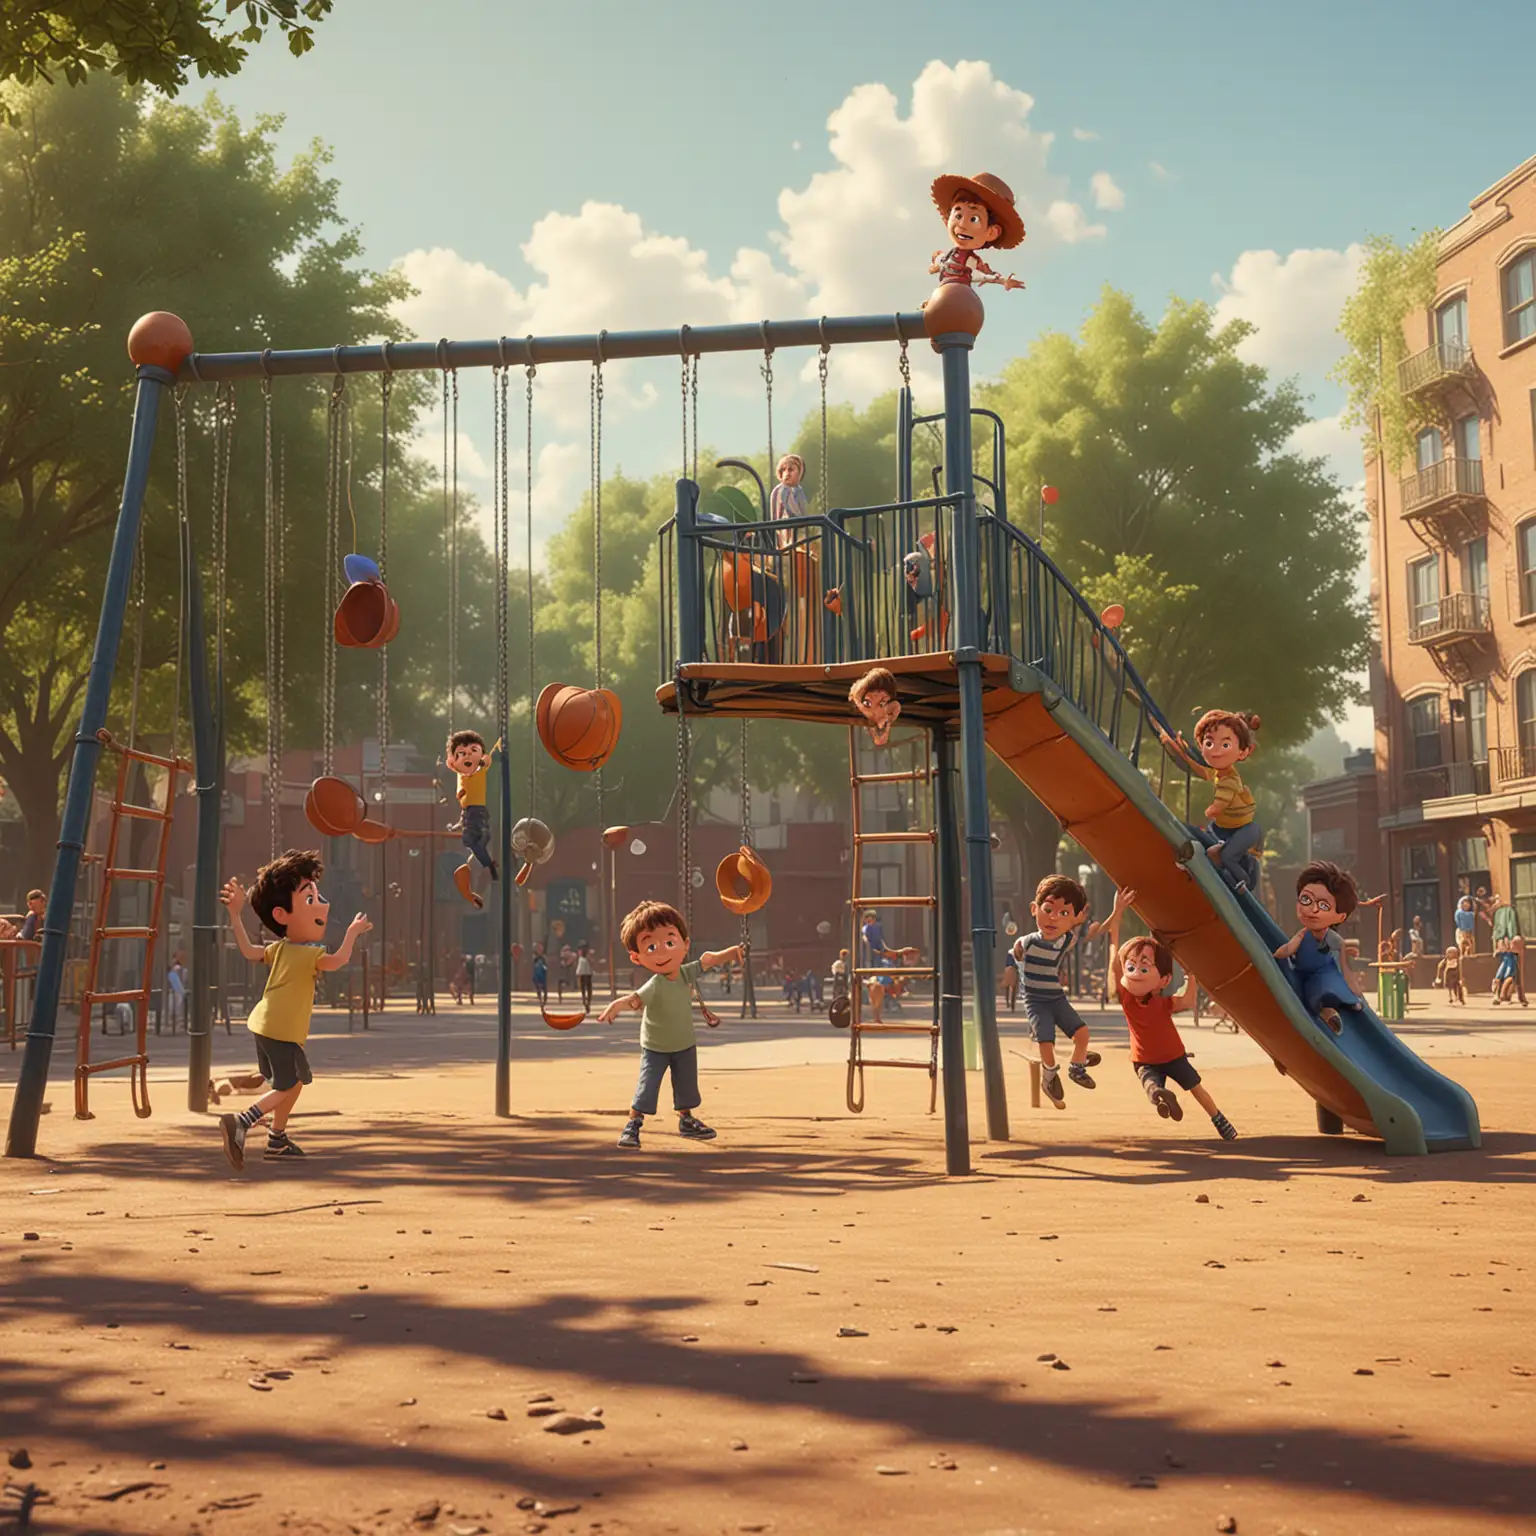 children playing on a playground pixar style